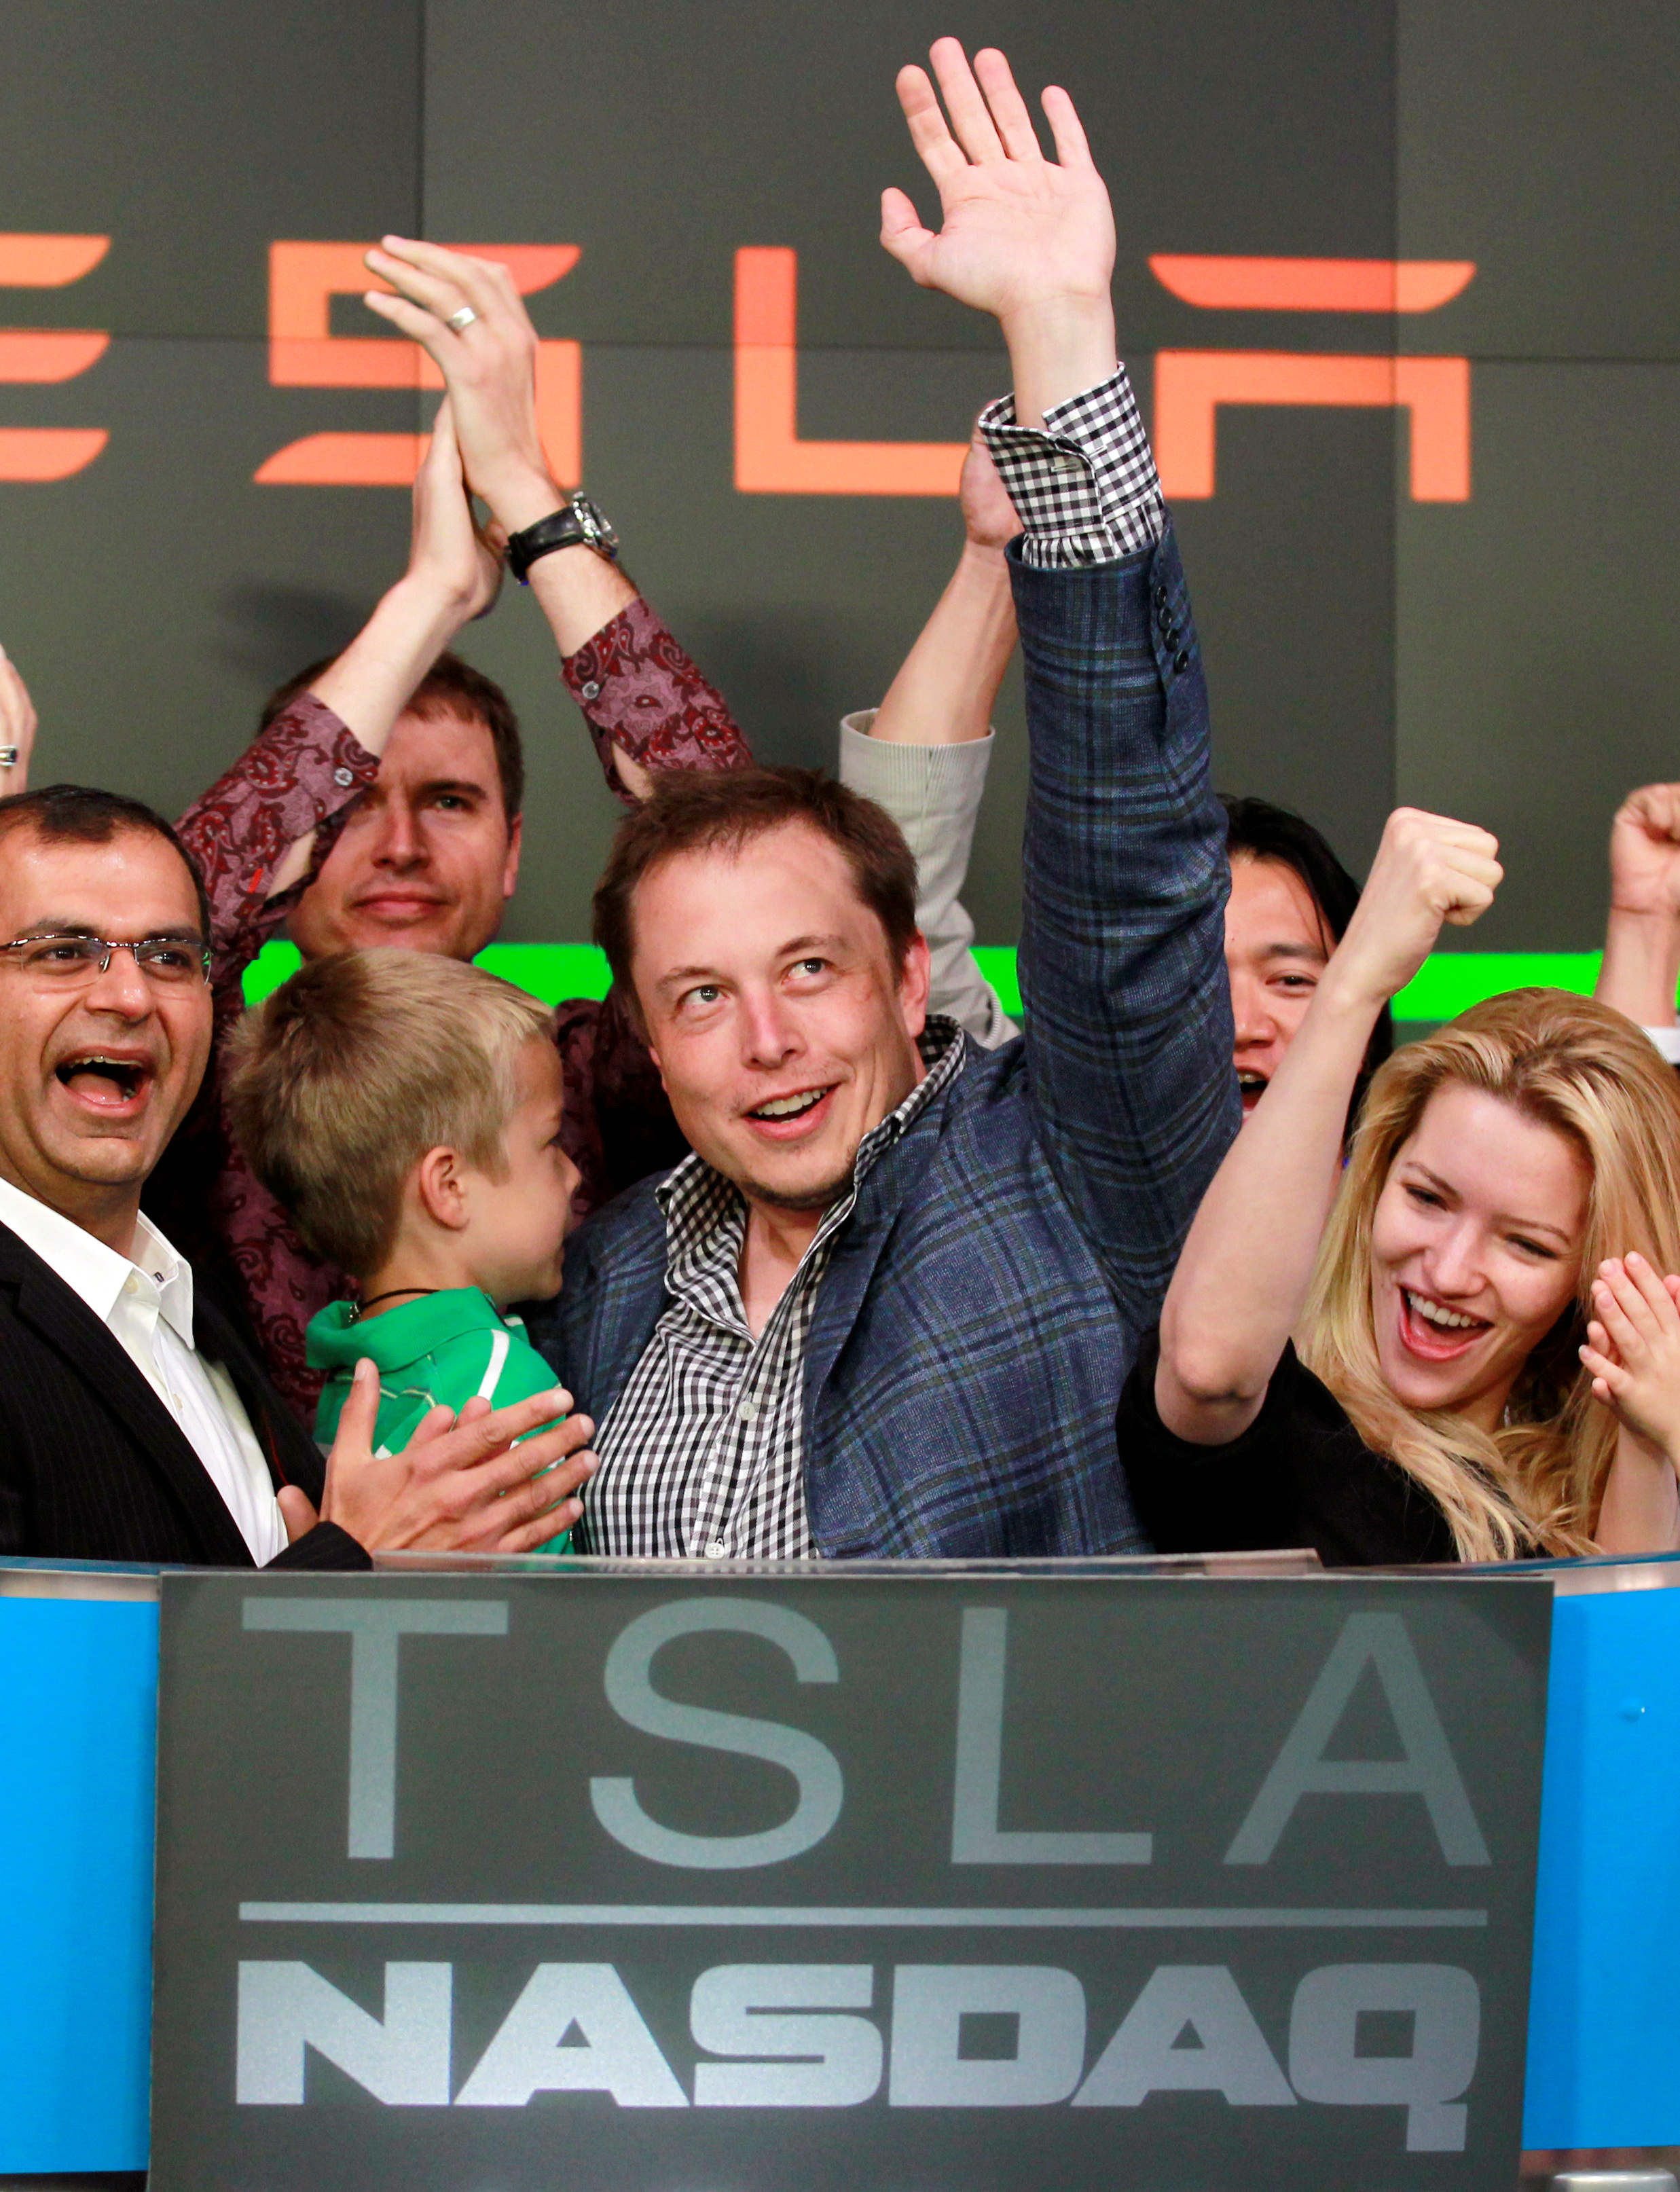 CEO of Tesla Motors Elon Musk waves after ringing the opening bell at the NASDAQ market in celebration of his company's initial public offering in New York